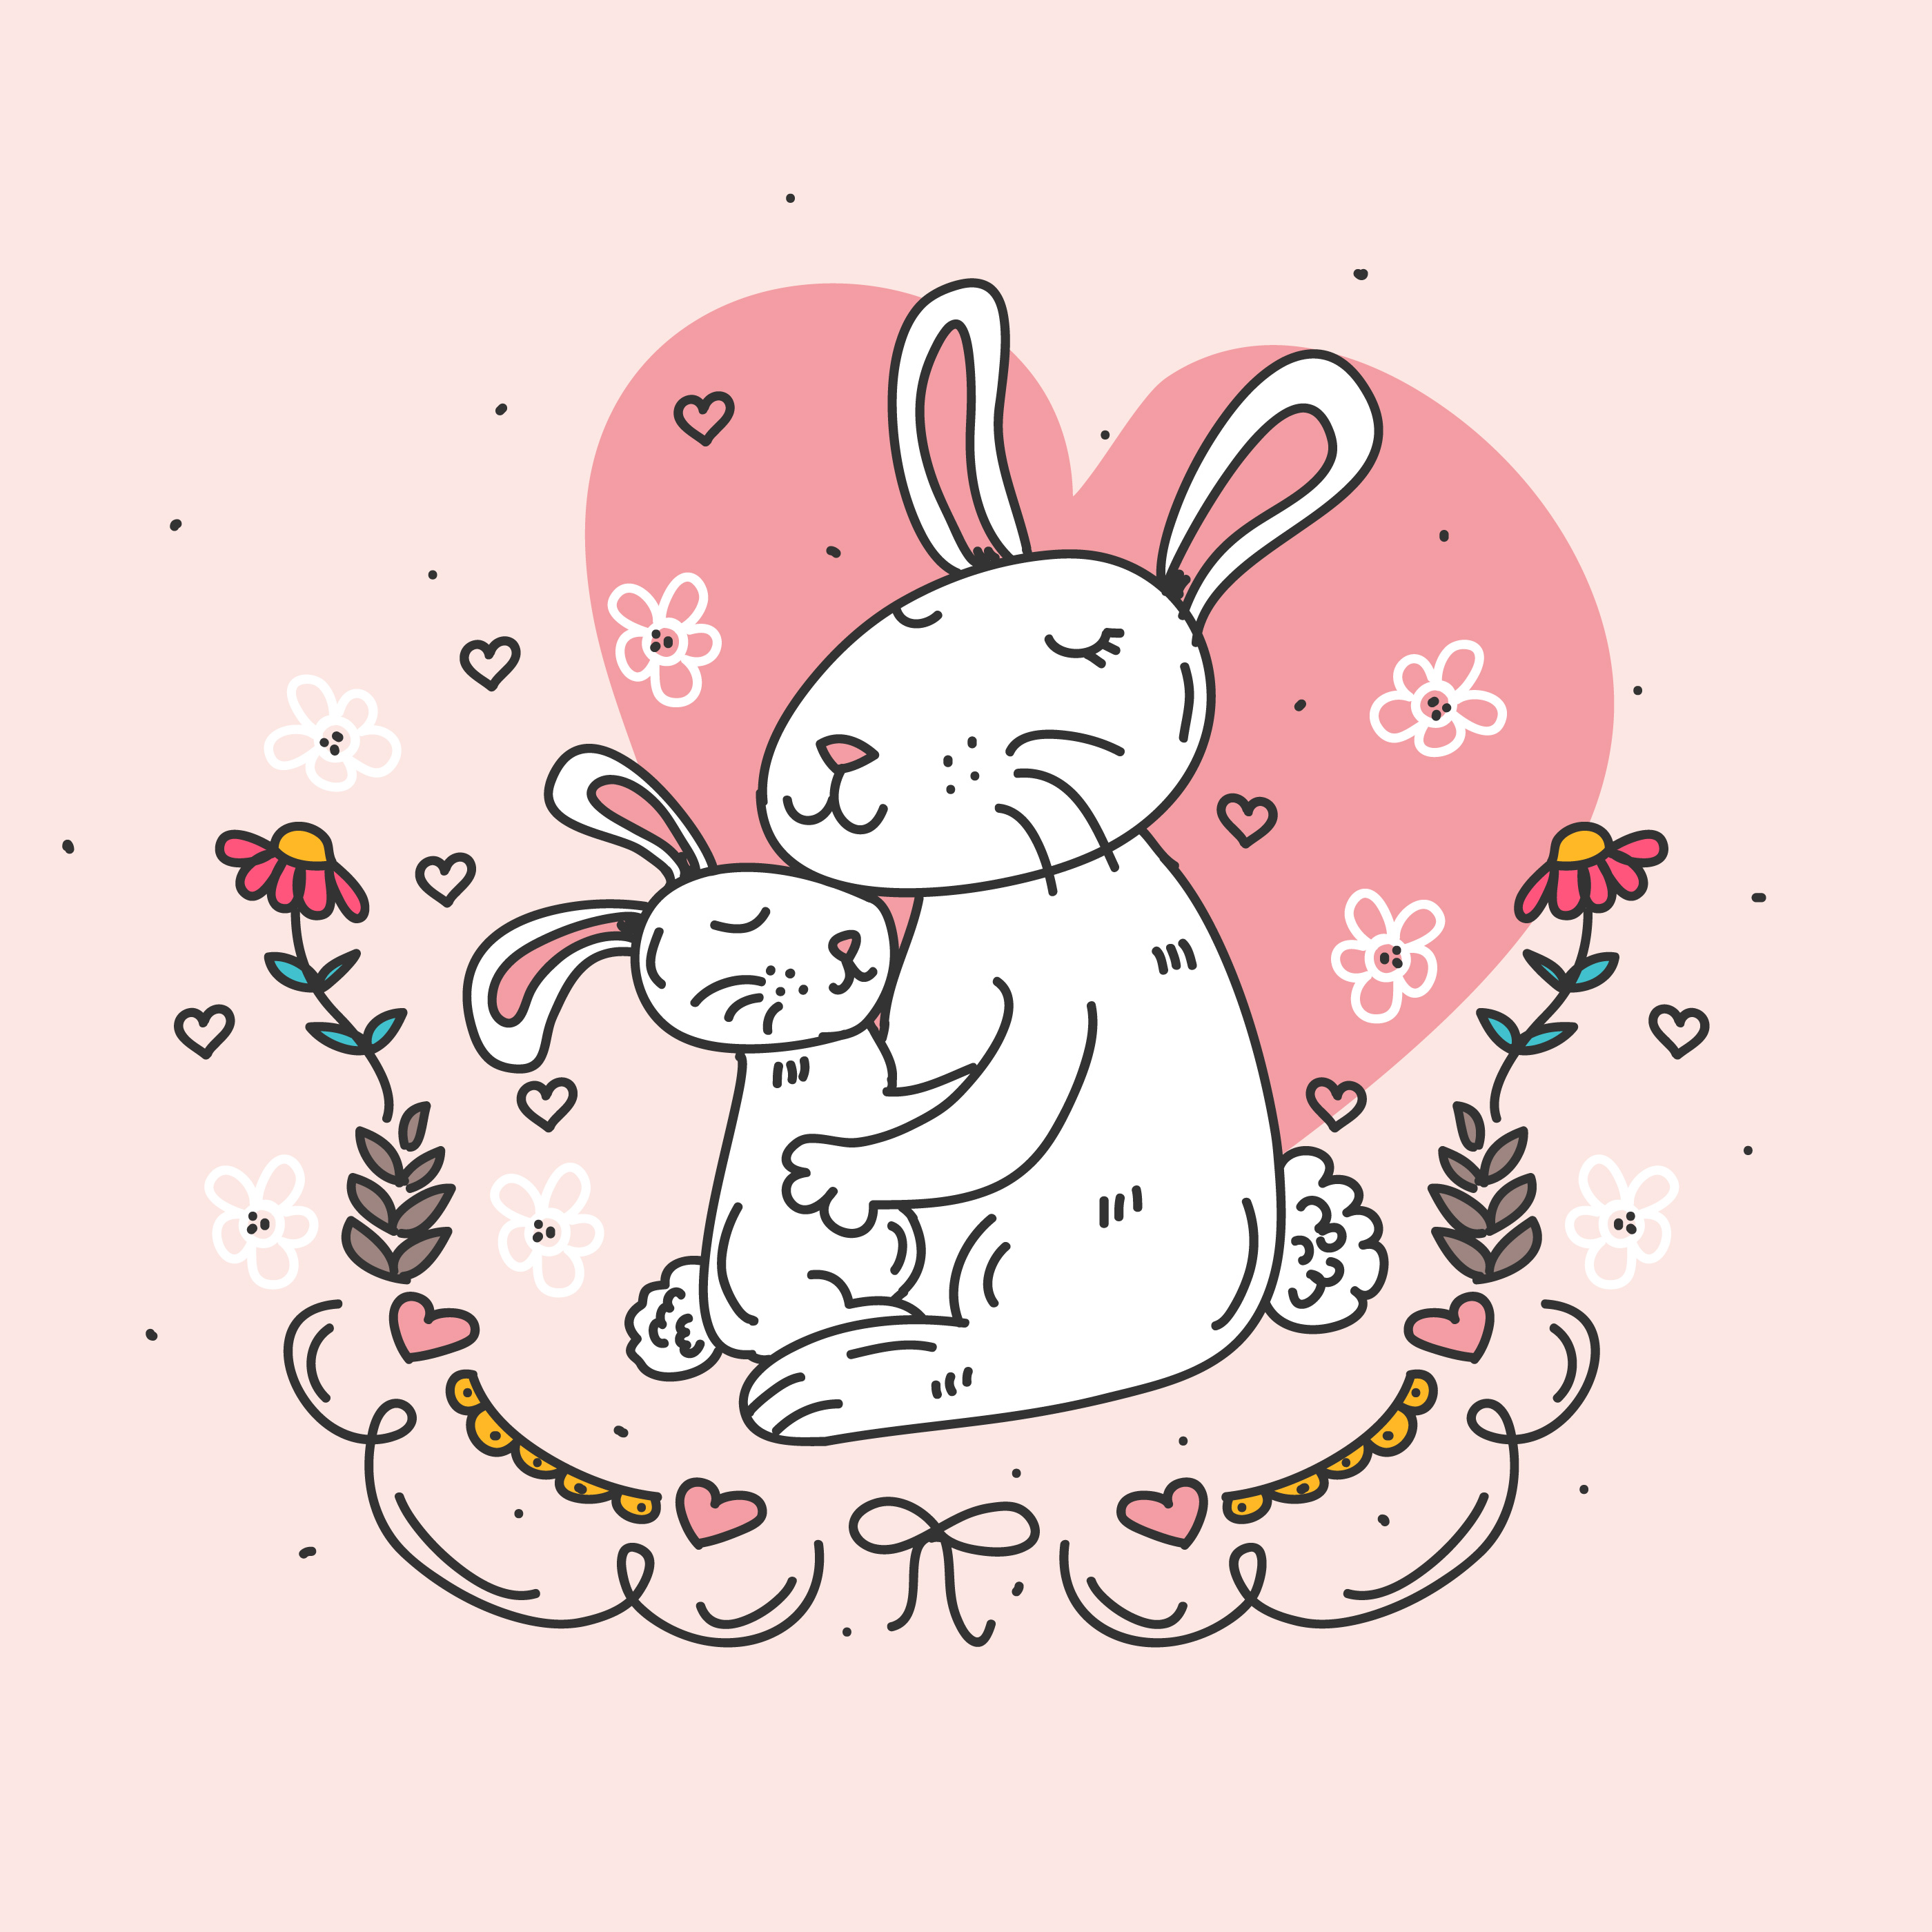 Download Rabbit Mom And Baby - Download Free Vectors, Clipart ...